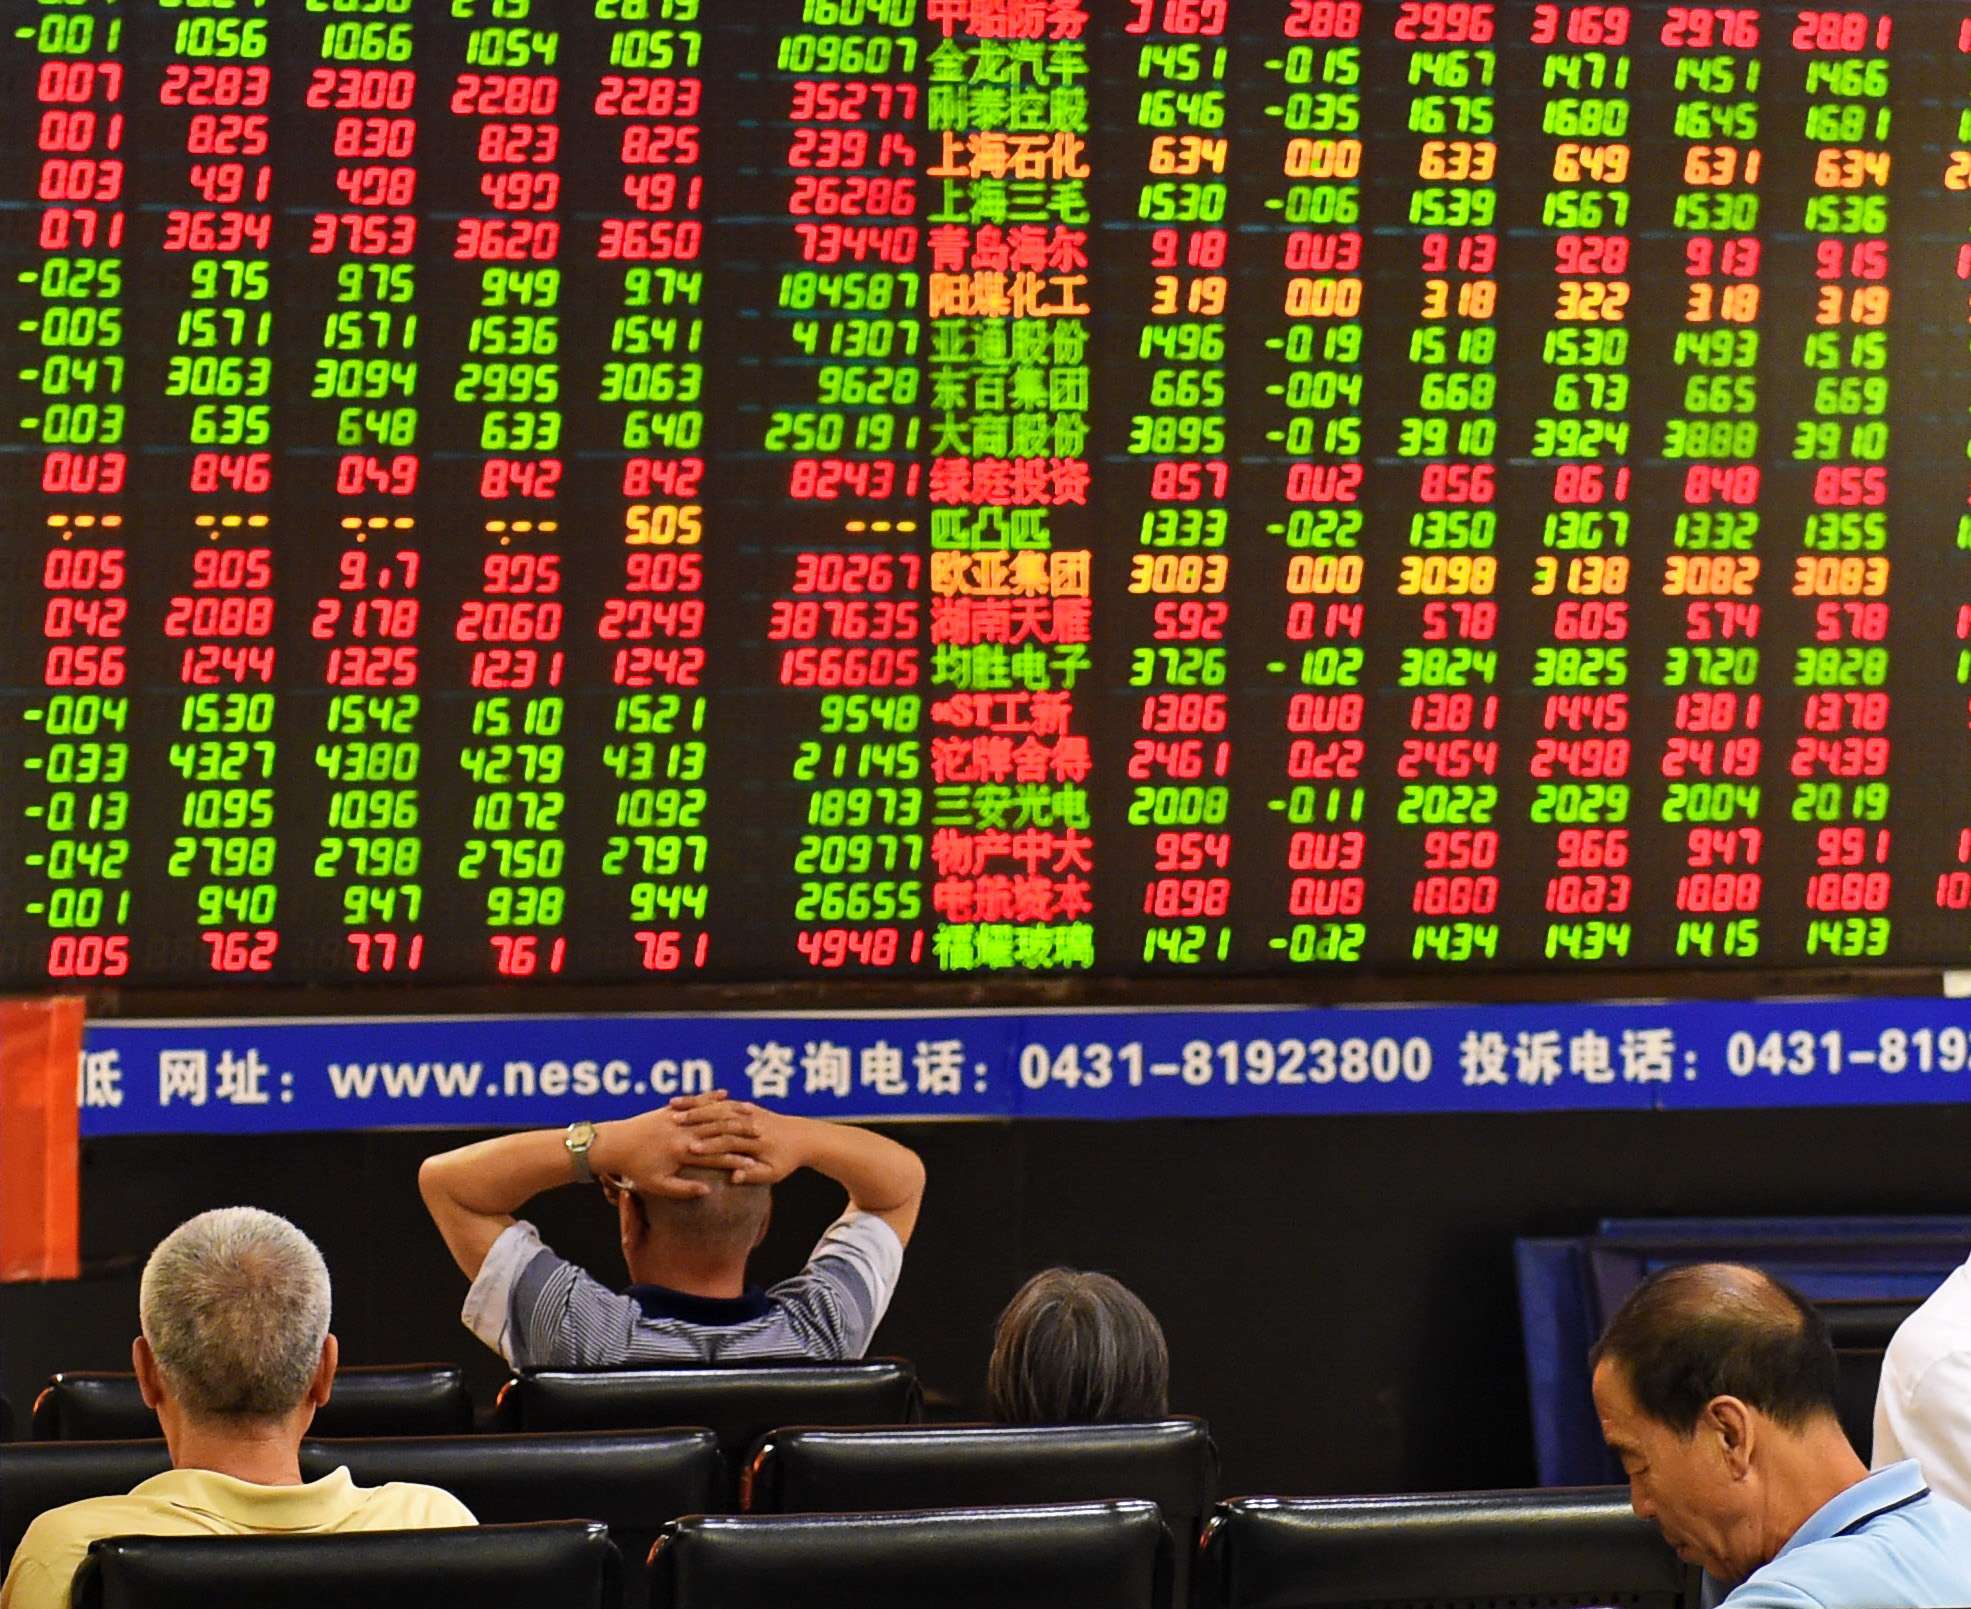 Xu’s detention followed a stock rout that hit China’s stock market in June 2015, wiping out US$5 trillion of market value in weeks. Photo: Xinhua